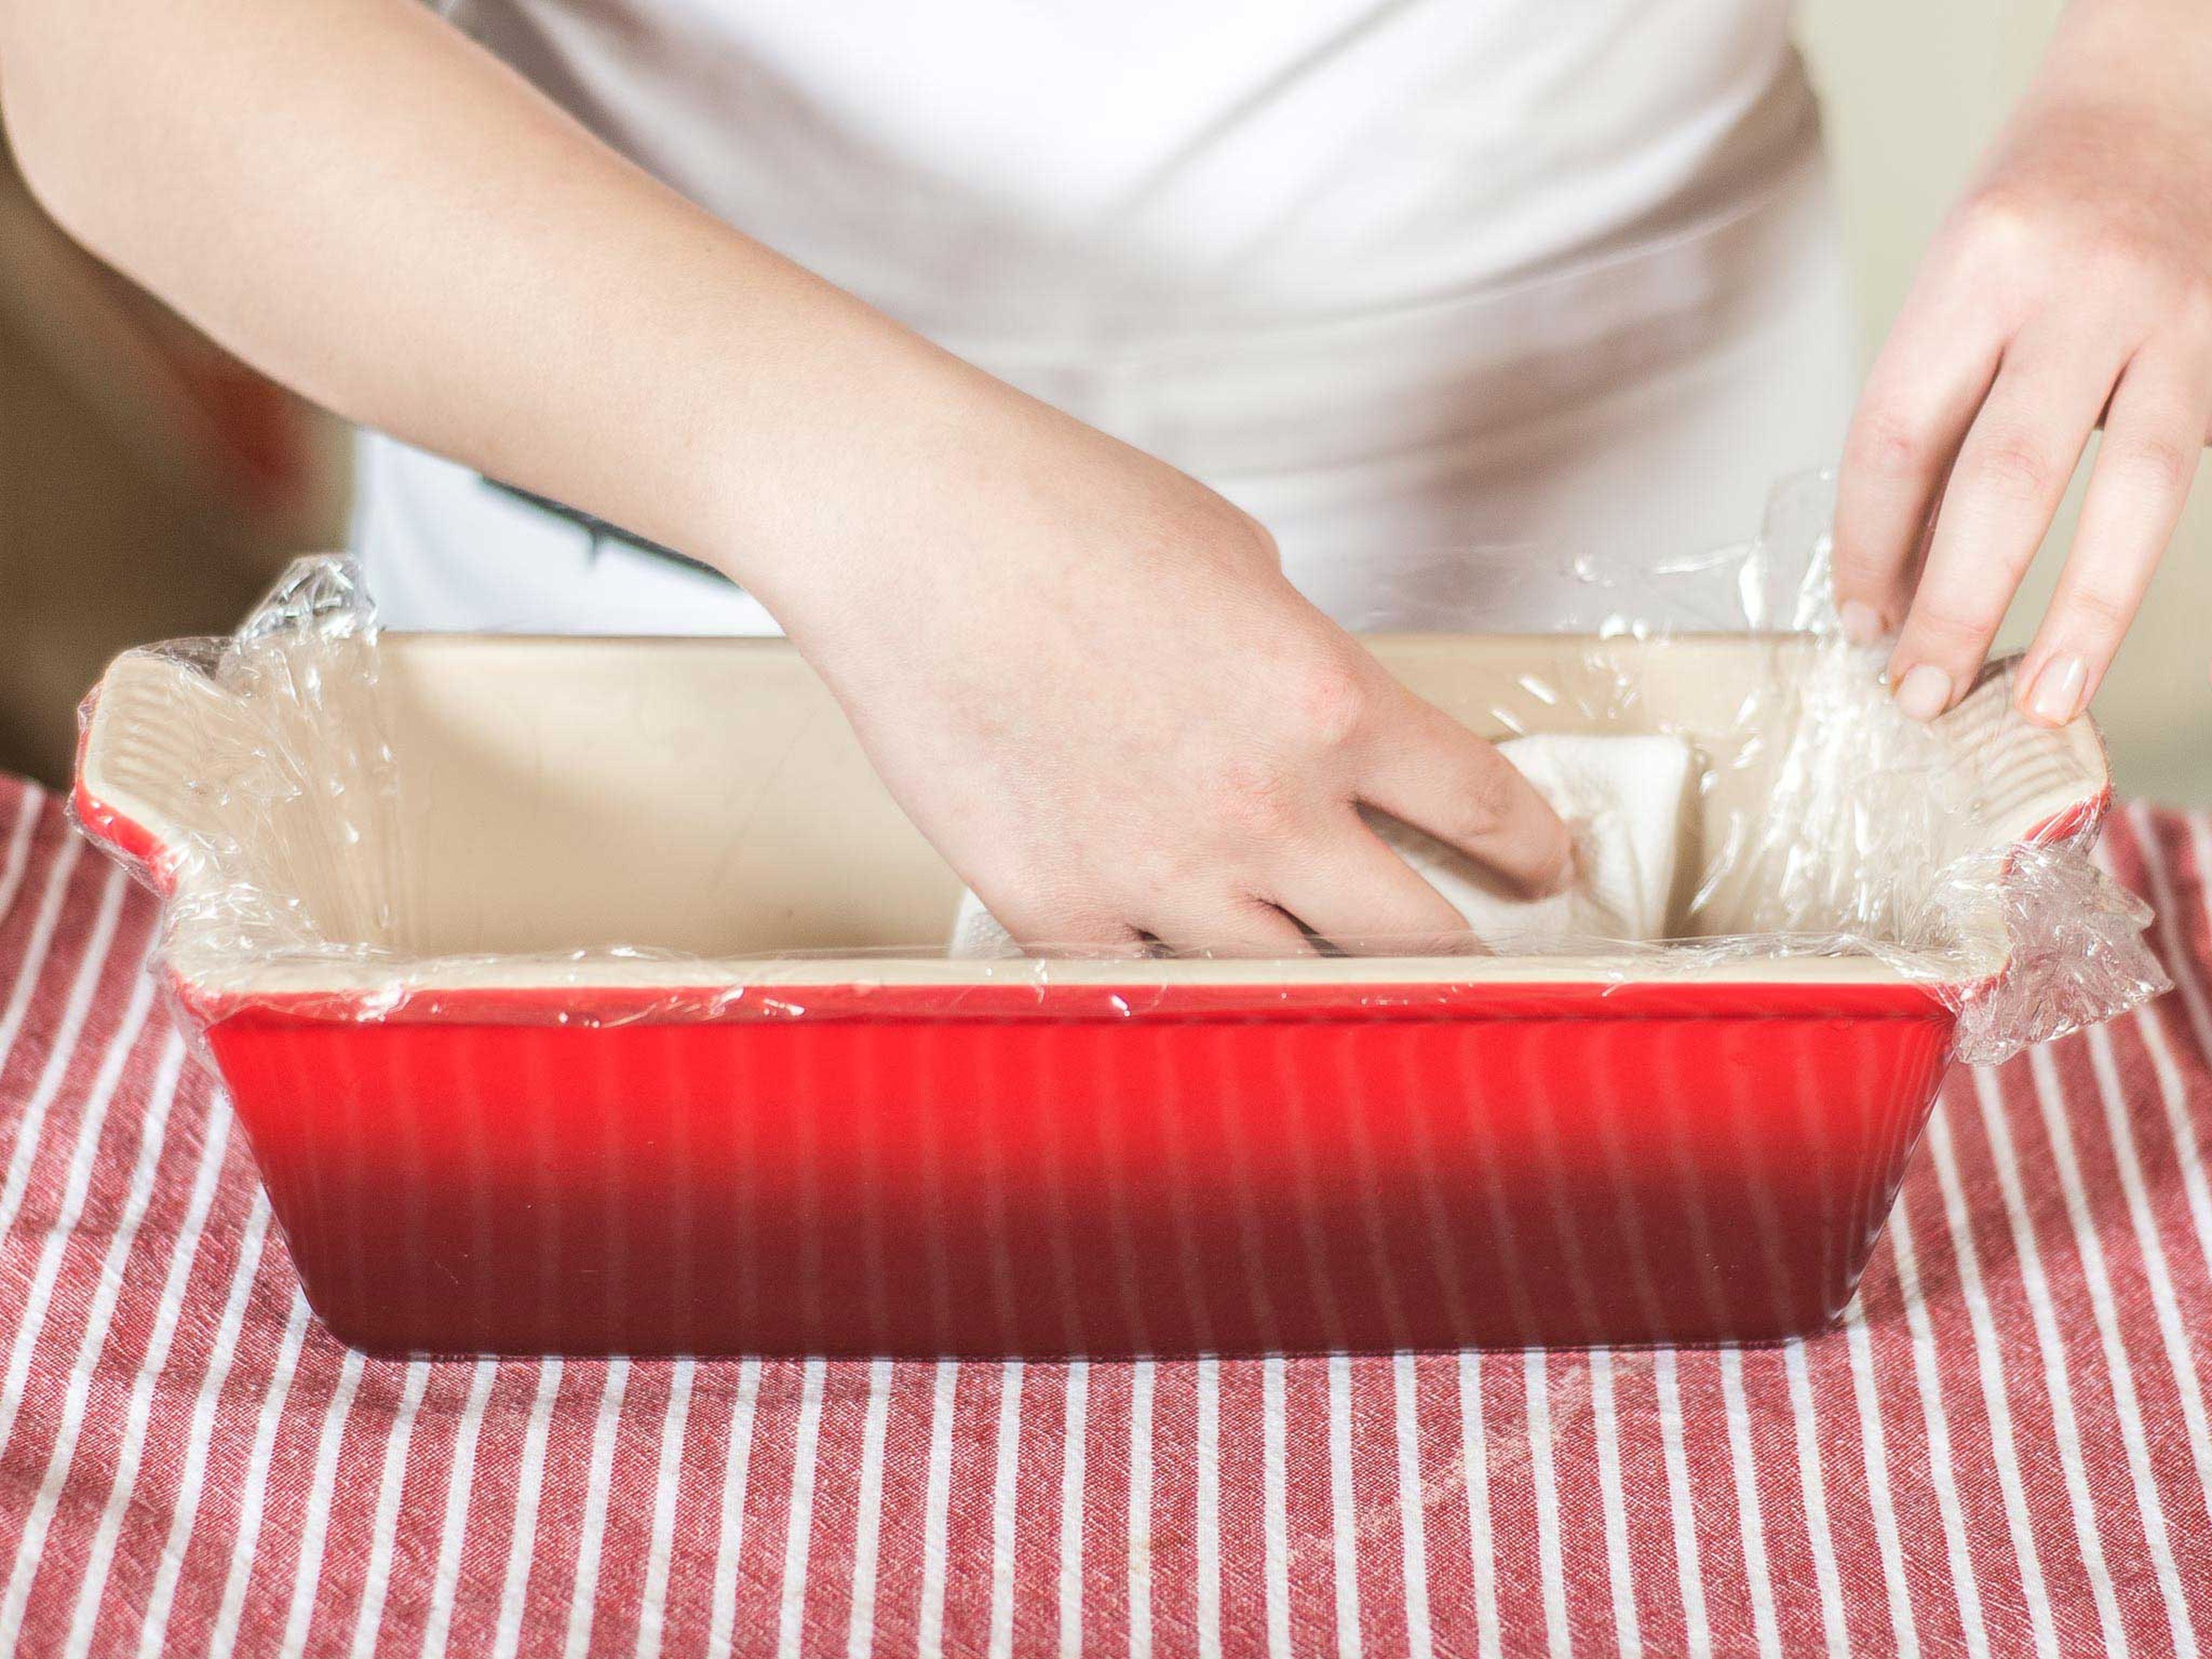 Line the terrine form with plastic wrap. This works best when the form is filled with a small amount of water, allowing the plastic wrap to lie perfectly inside it. Then pour out the water and pat dry.